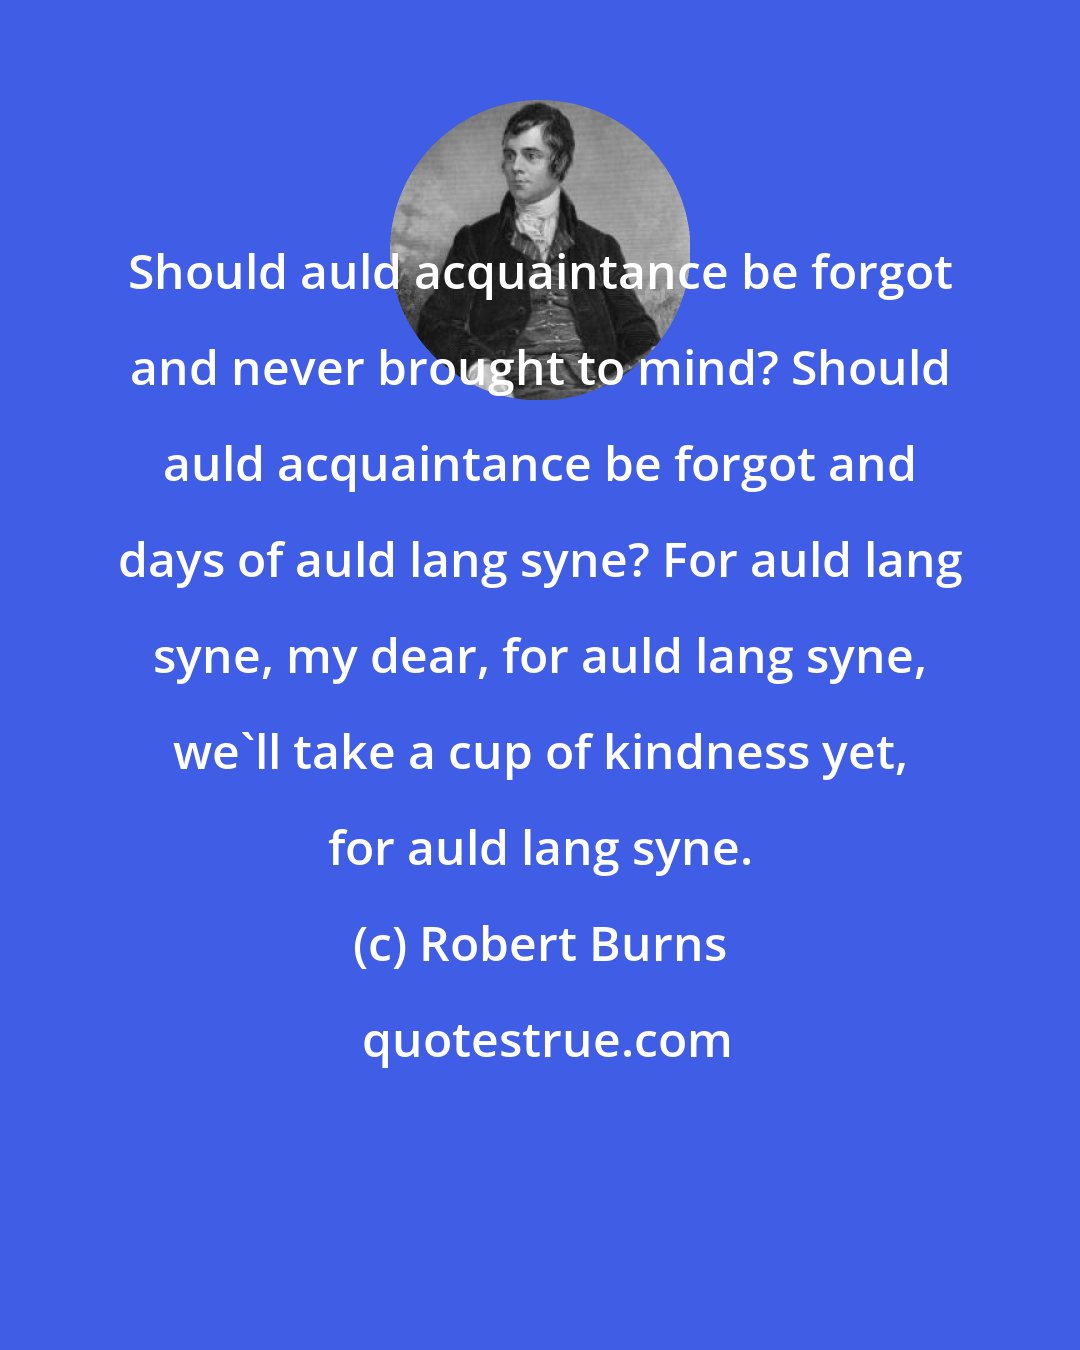 Robert Burns: Should auld acquaintance be forgot and never brought to mind? Should auld acquaintance be forgot and days of auld lang syne? For auld lang syne, my dear, for auld lang syne, we'll take a cup of kindness yet, for auld lang syne.